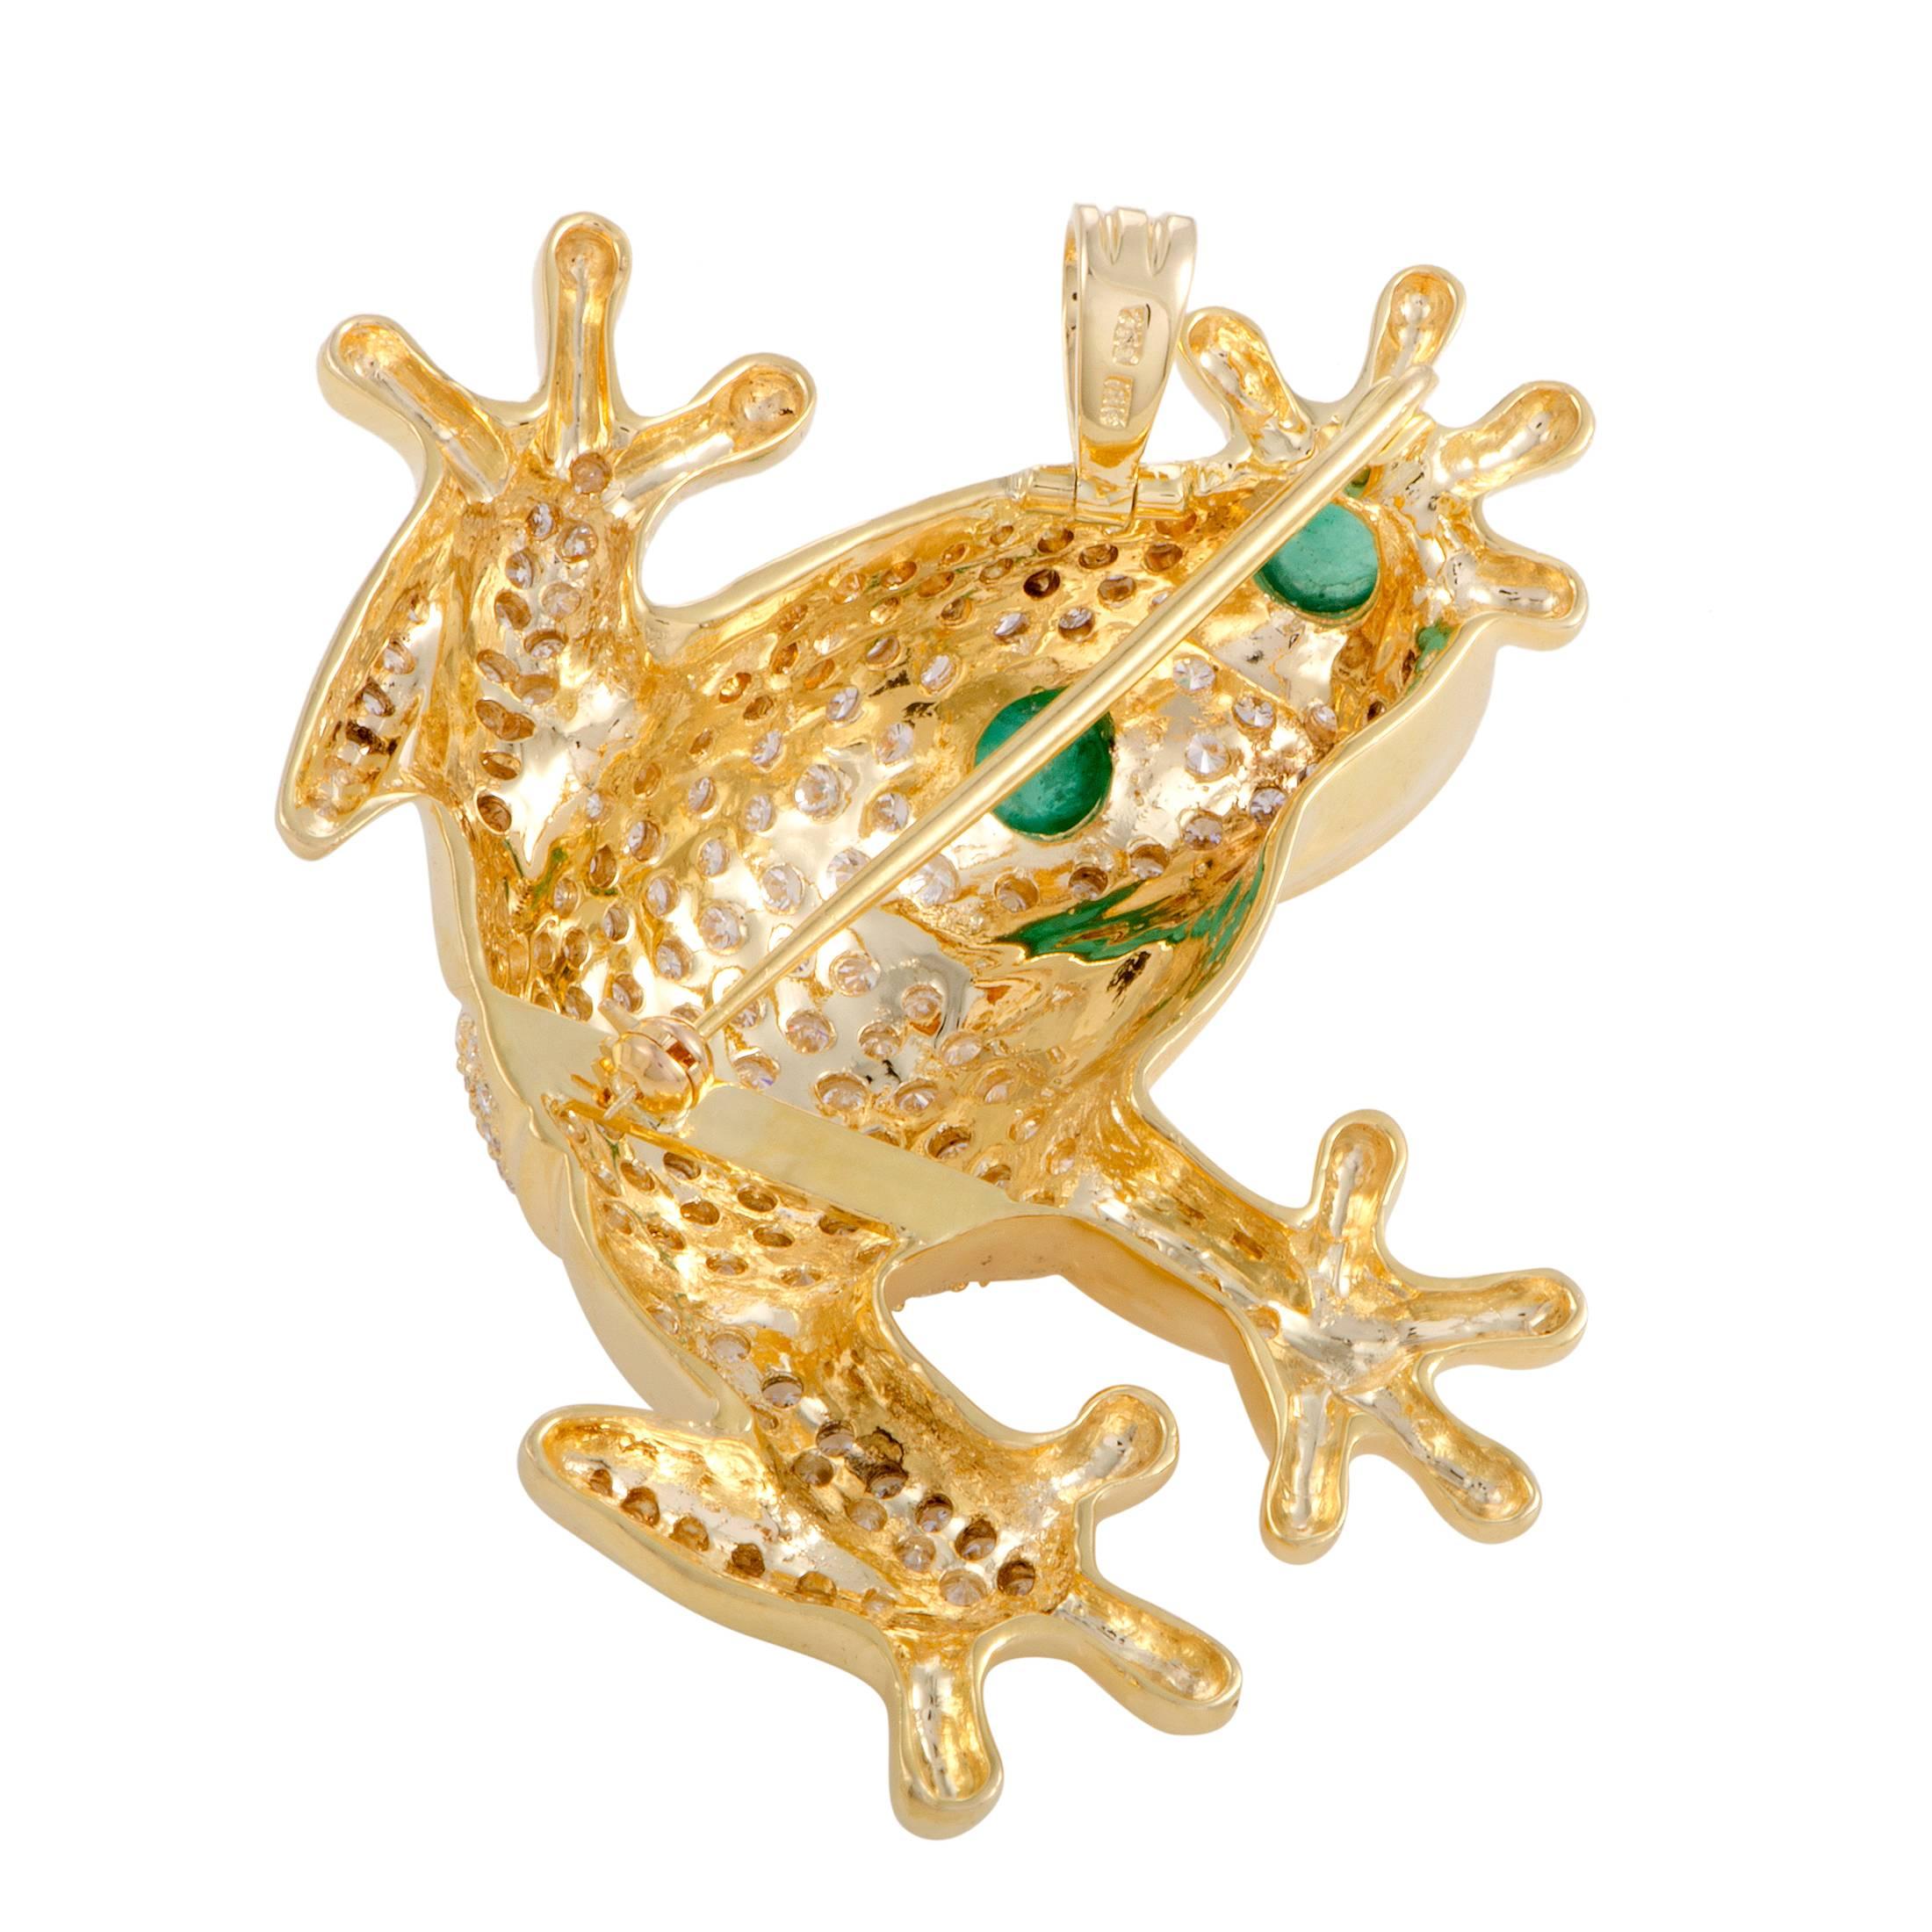 An adorable motif presented in a glamorously luxurious setting, the marvelous shape of a frog is comprised of precious 18K yellow gold and glittering diamonds weighing in total approximately 5.80 carats in this enchanting brooch.